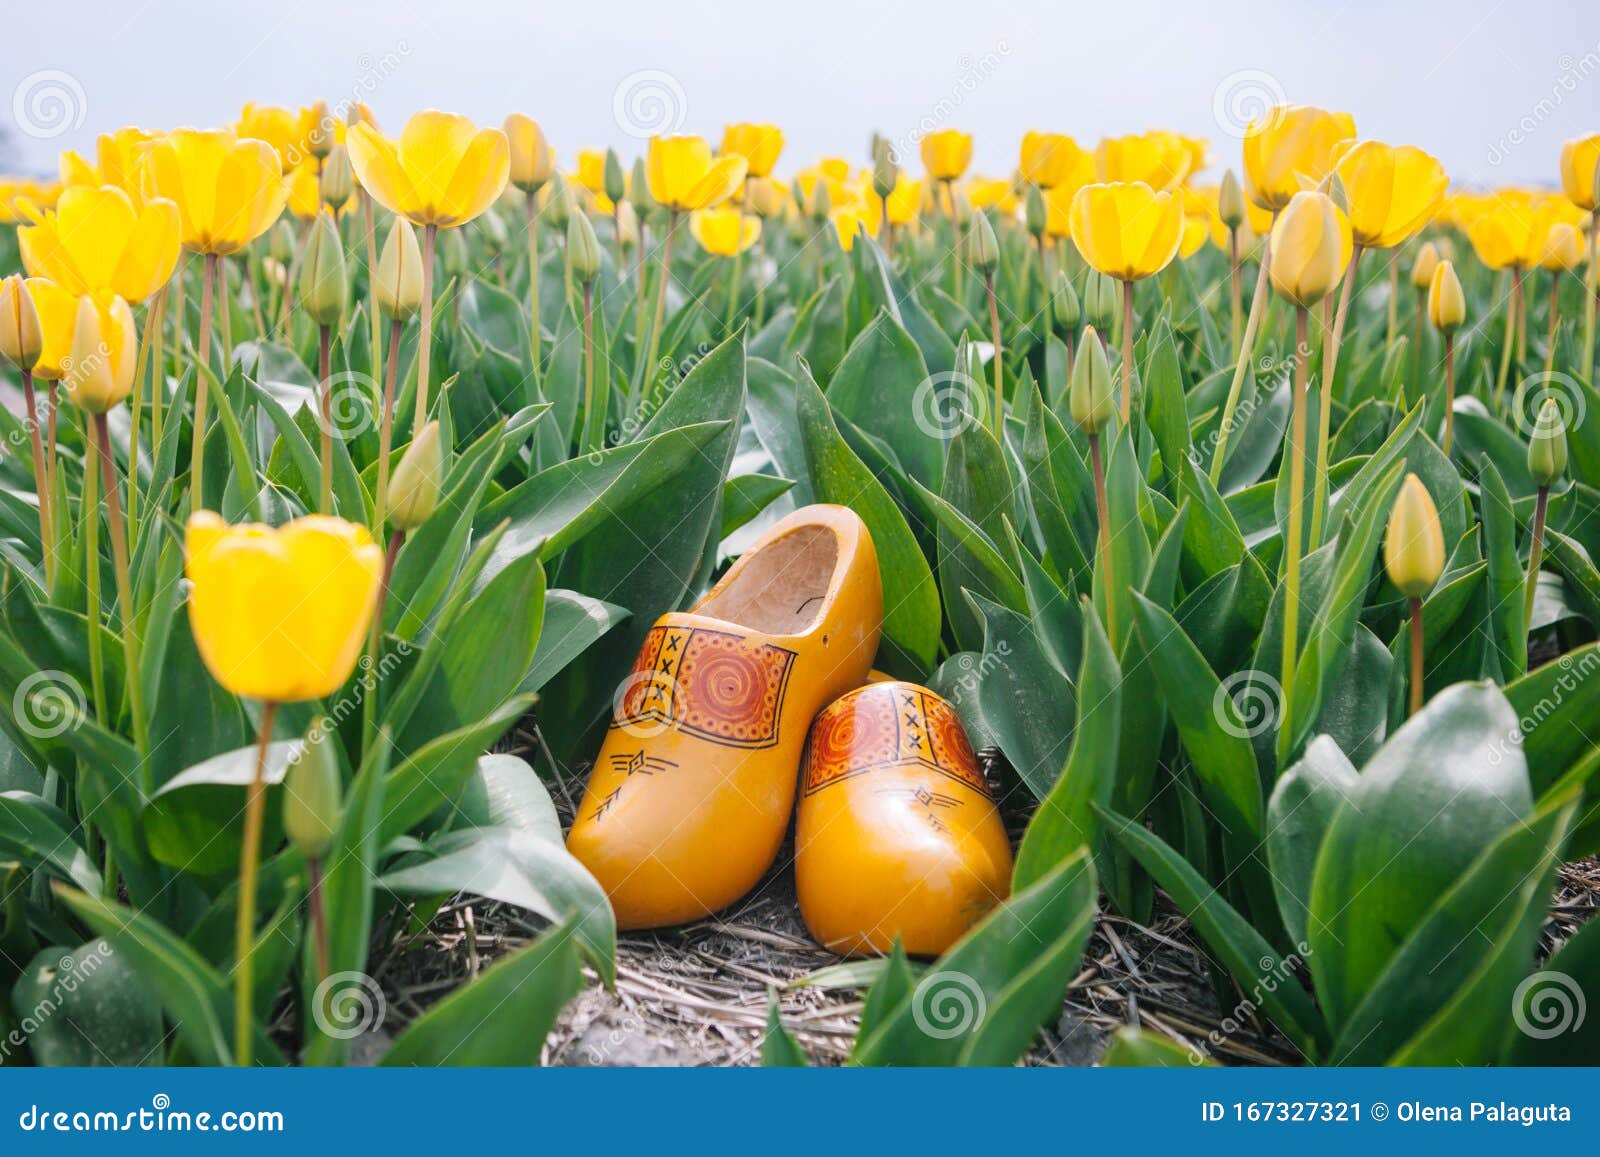 Close Up Typical Dutch Wooden Clogs Image - Image clog, flowers: